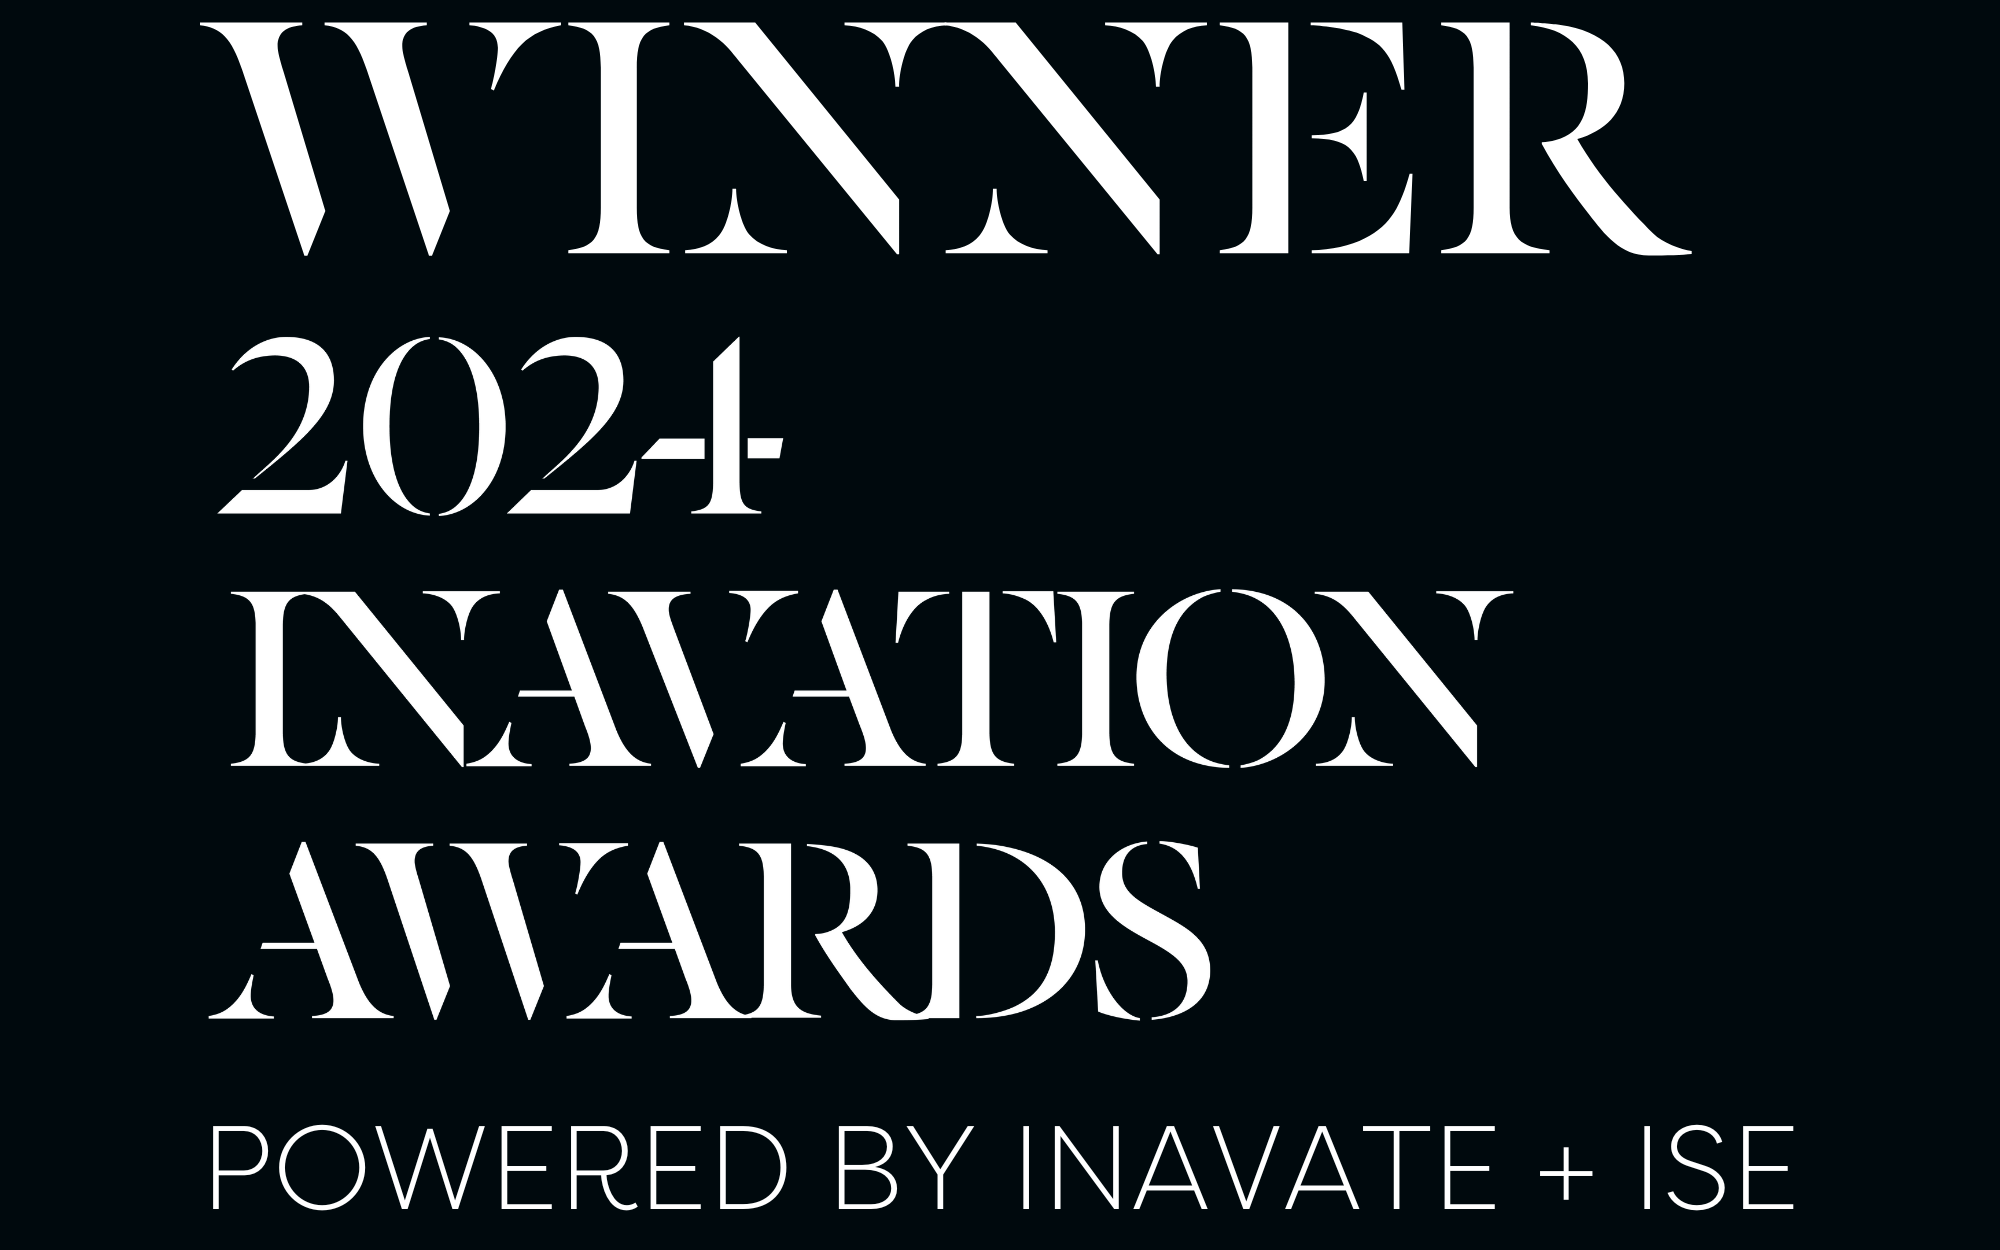 Winner of 2024 Inavation Awards - powered by Inavate + ISE